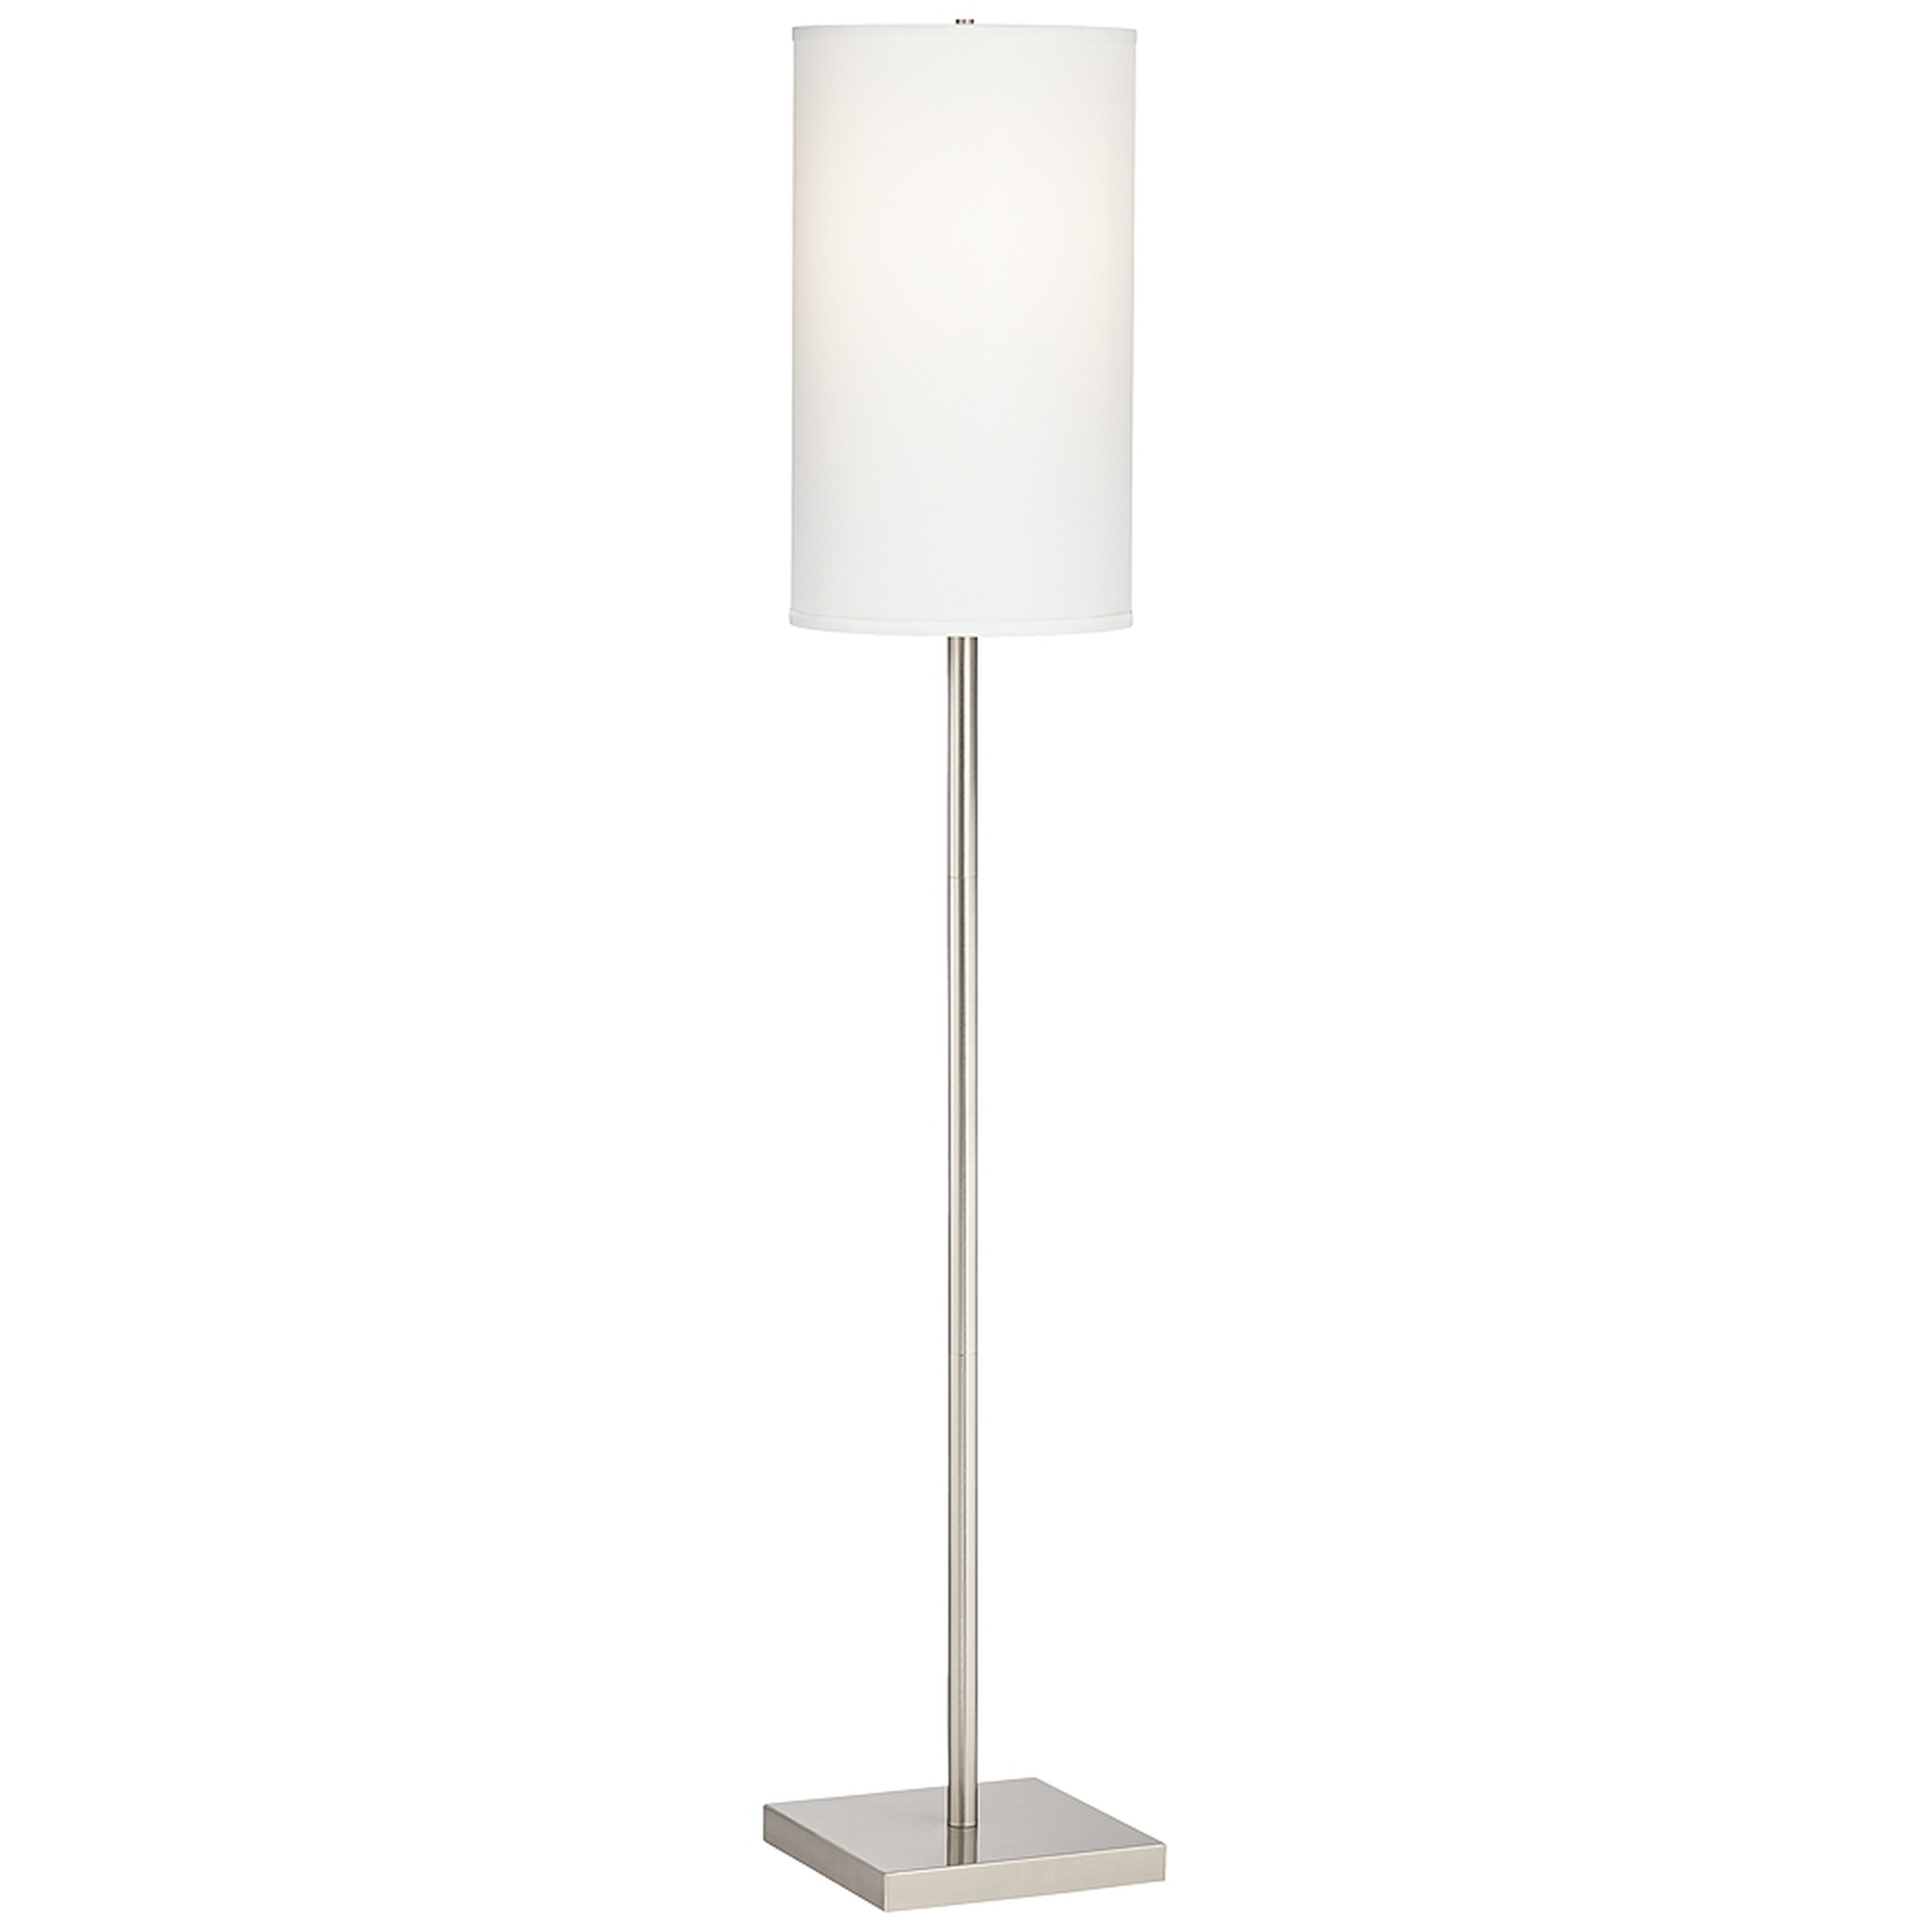 Coverly Brushed Nickel Floor Lamp - Style # 85A98 - Lamps Plus